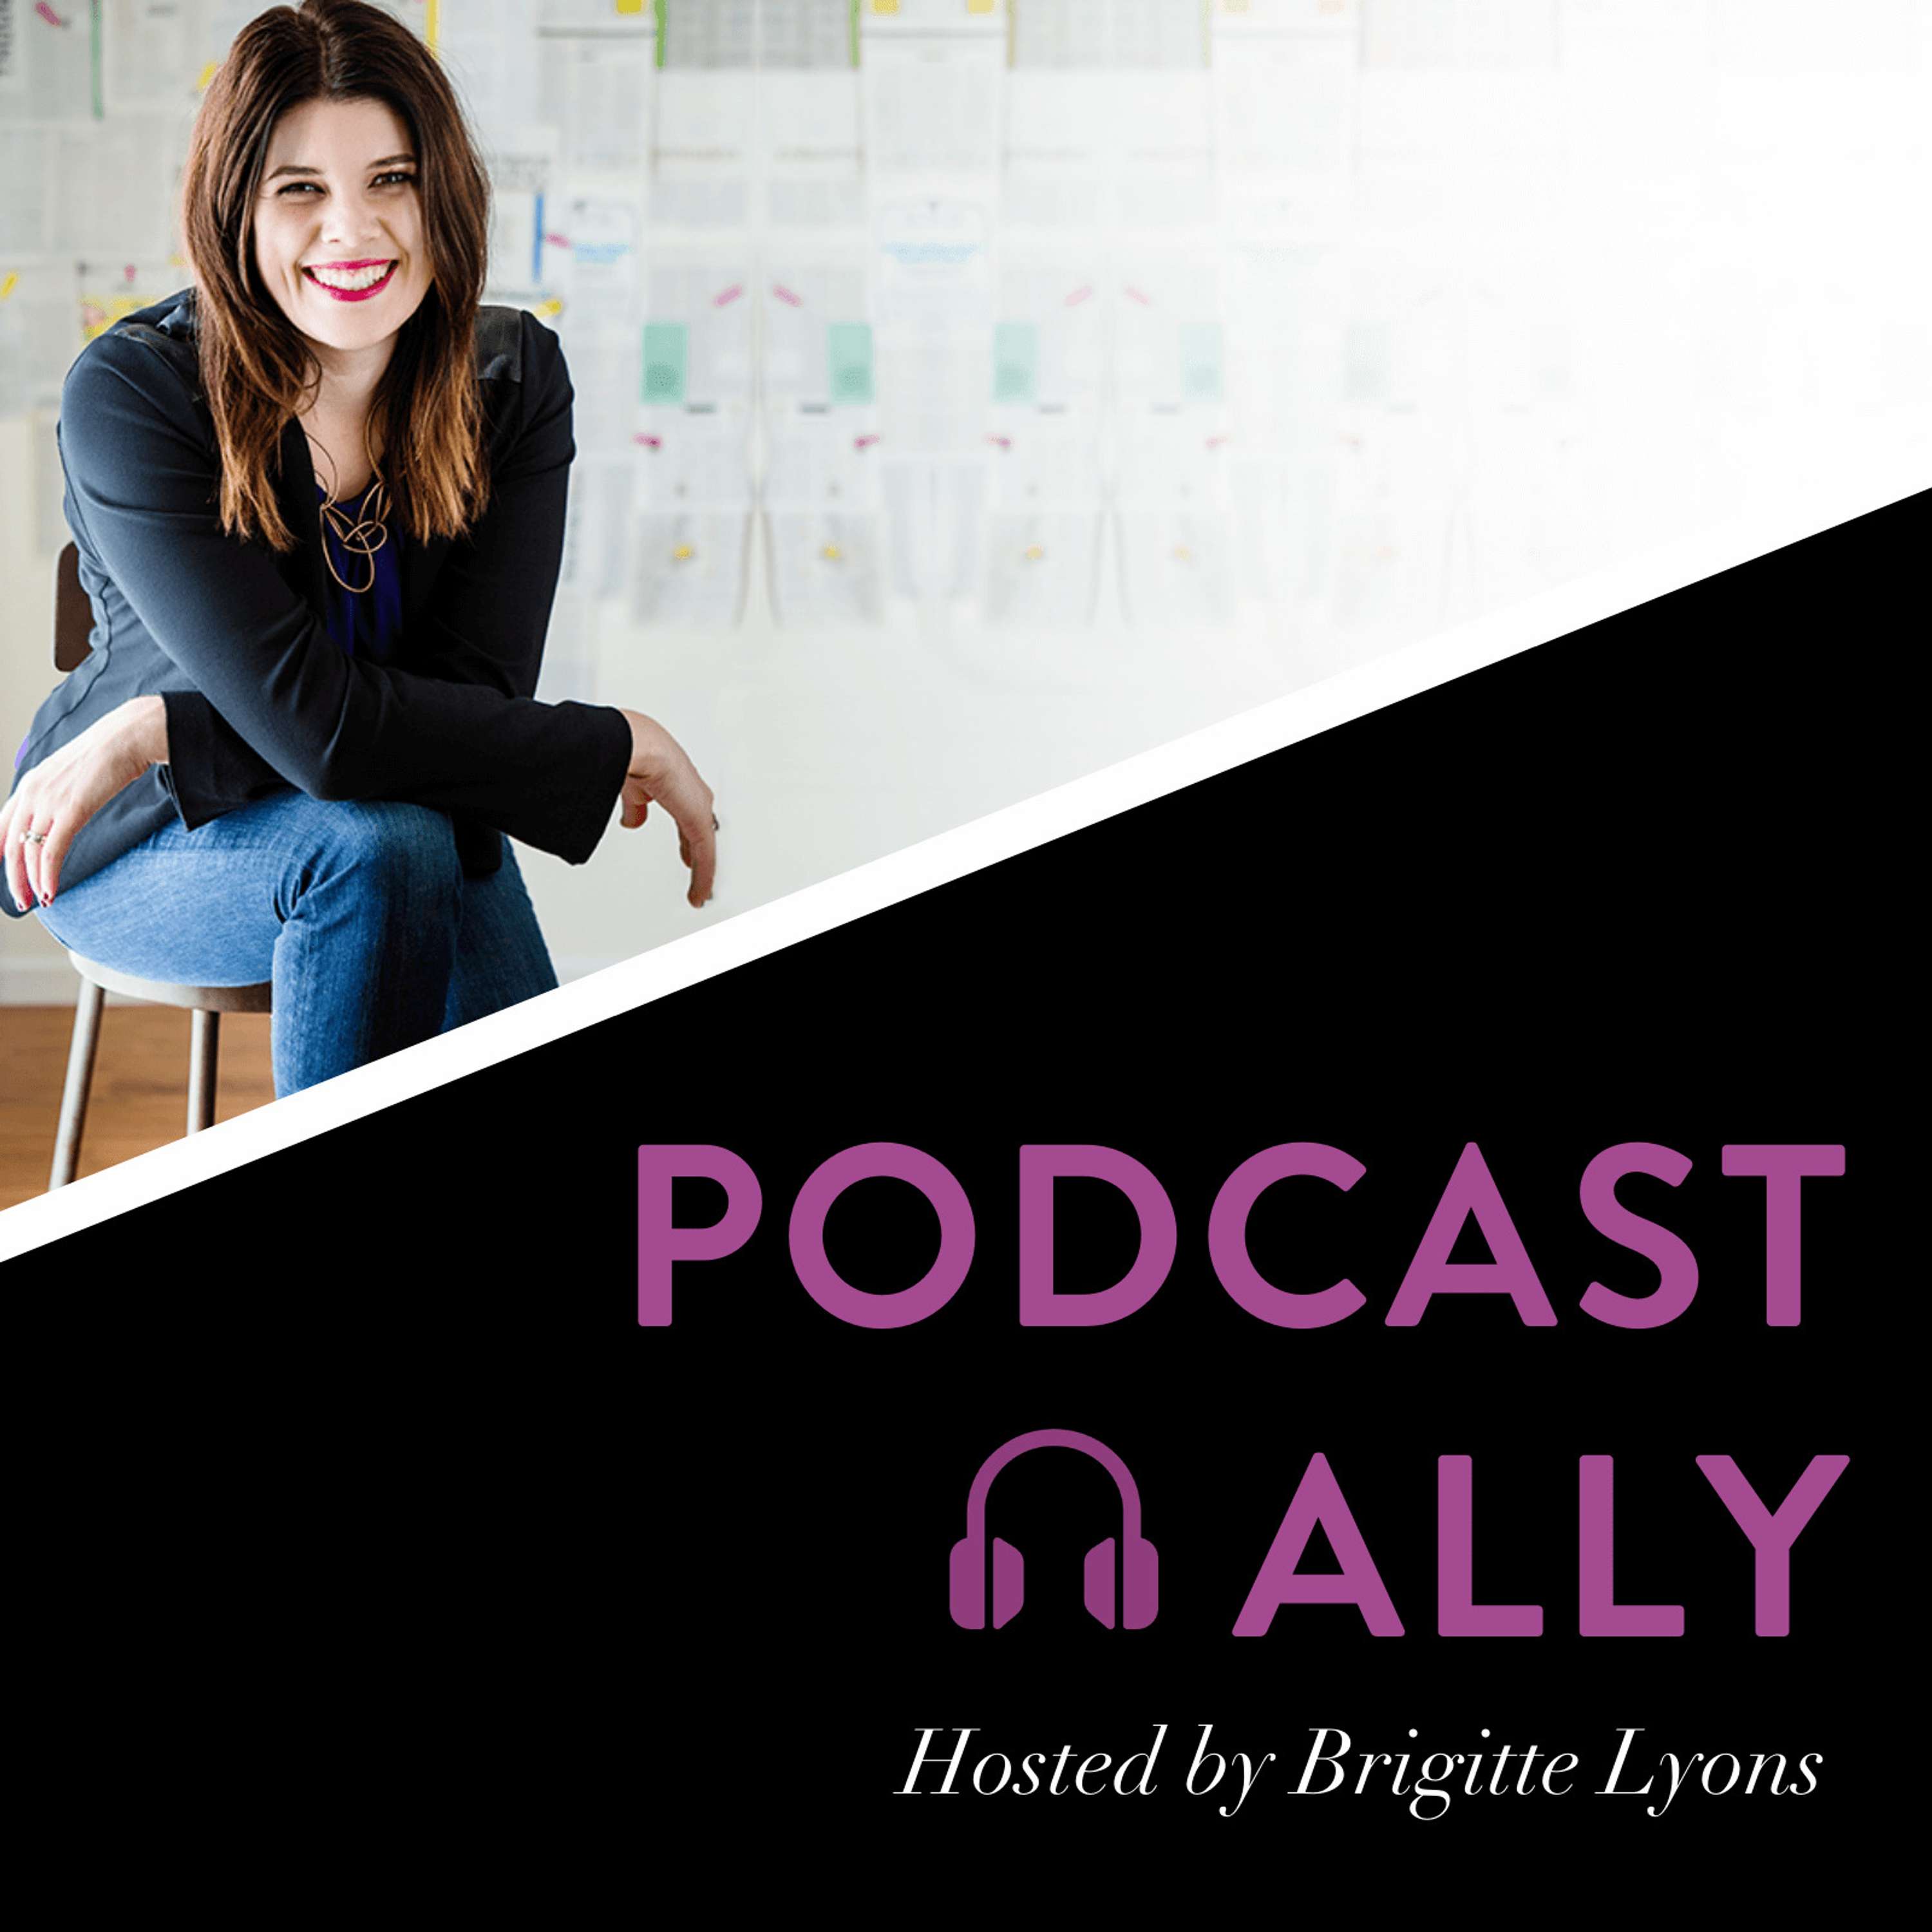 How to Pitch: Ready Enough Podcast